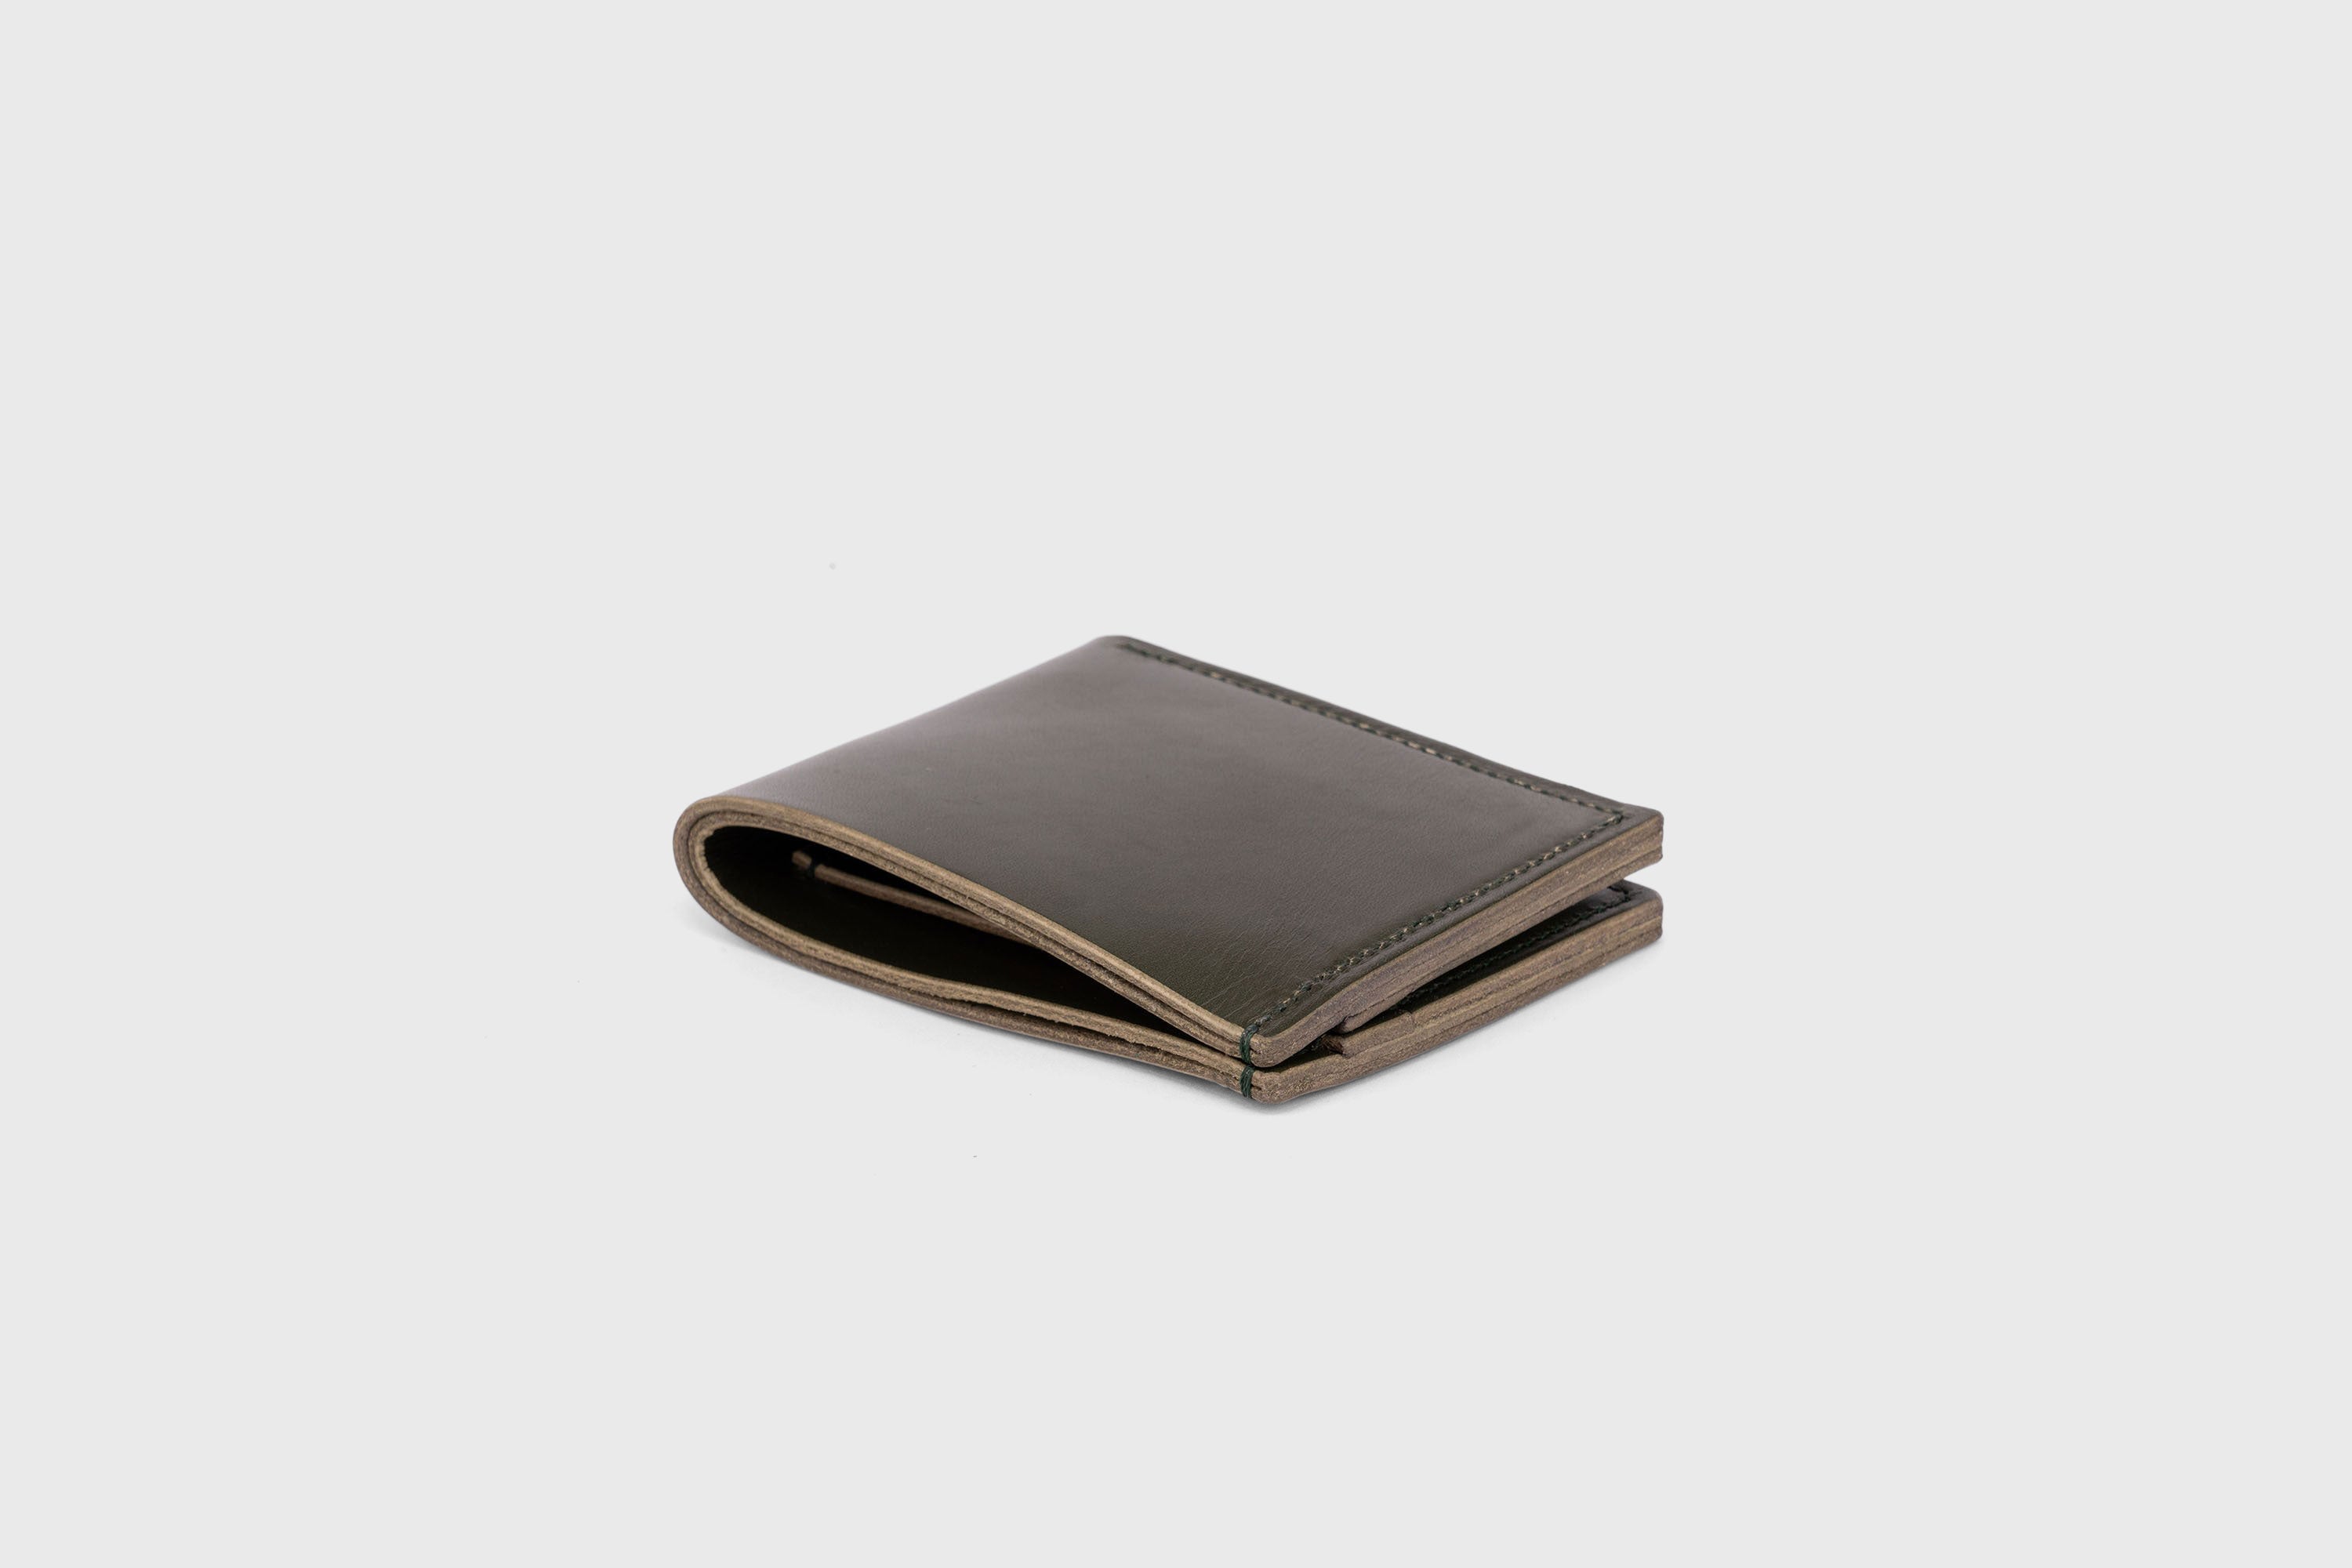 Bifold Wallet Dark Olive Green Leather Vegetable Tanned Leather Premium Classic Design and Handcrafted By Atelier Madre Manuel Dreeesmann Barcelona Spain